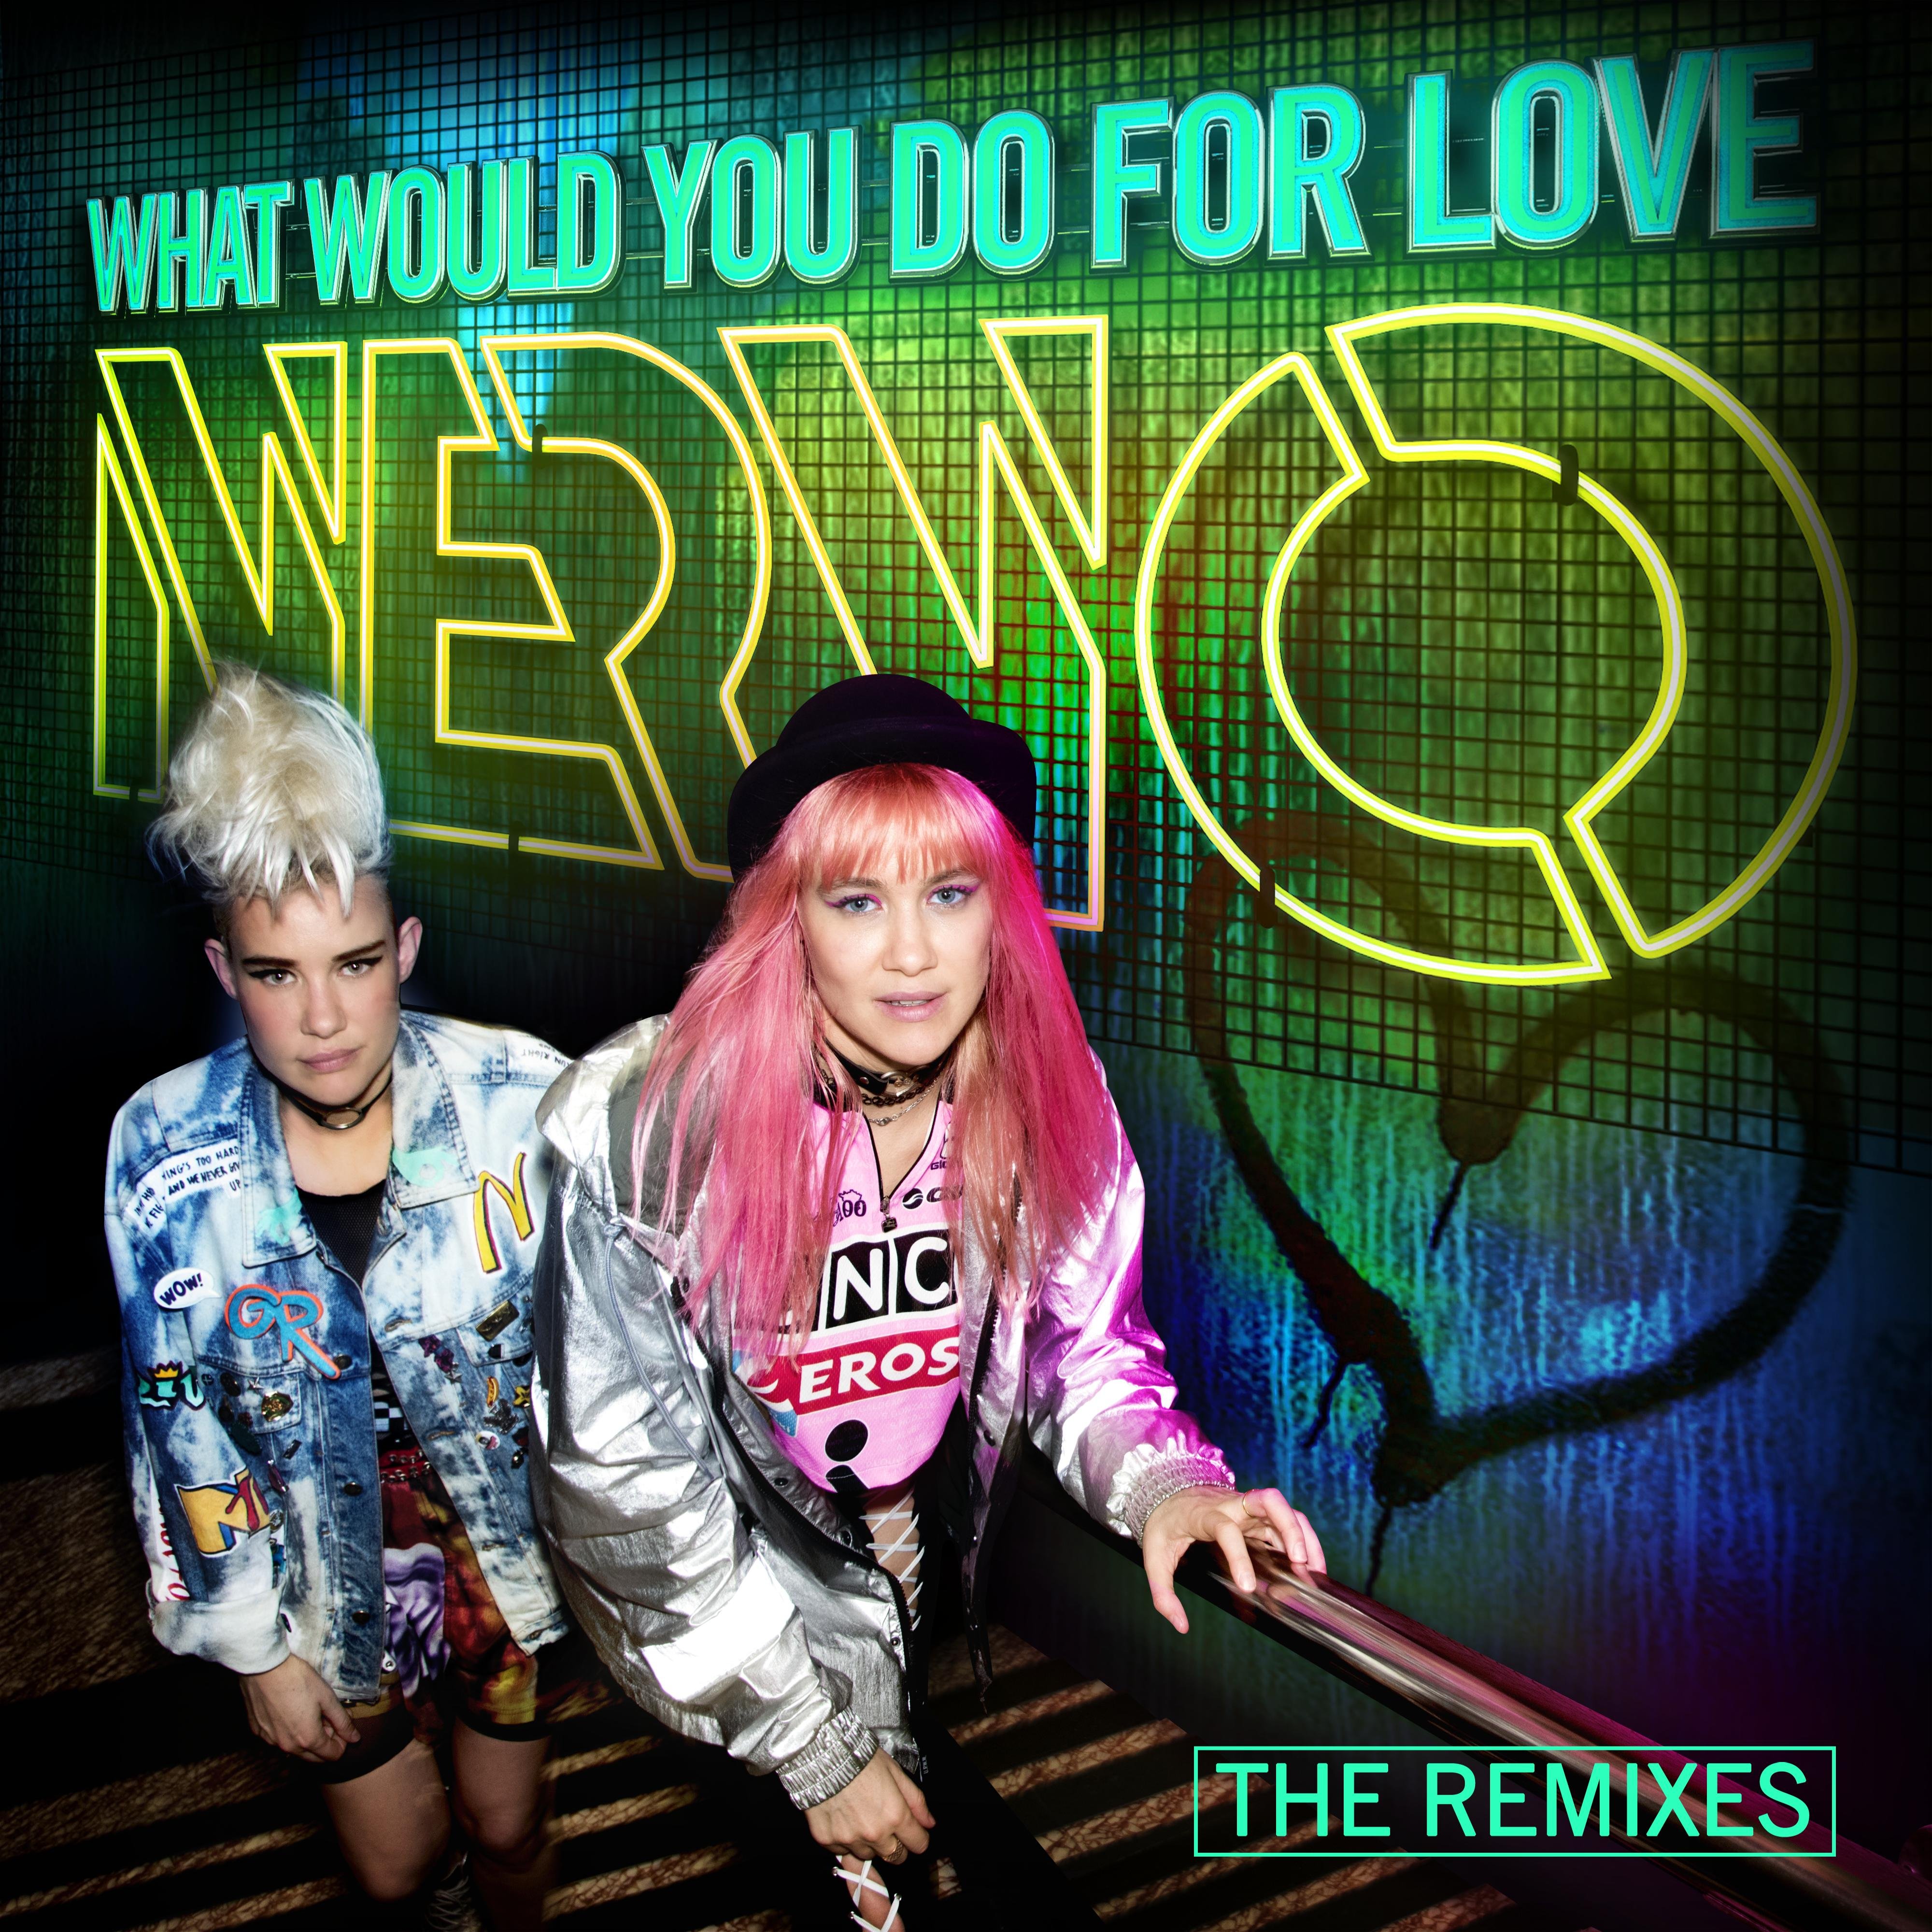 What Would Yo Do For Love (The Remixes)